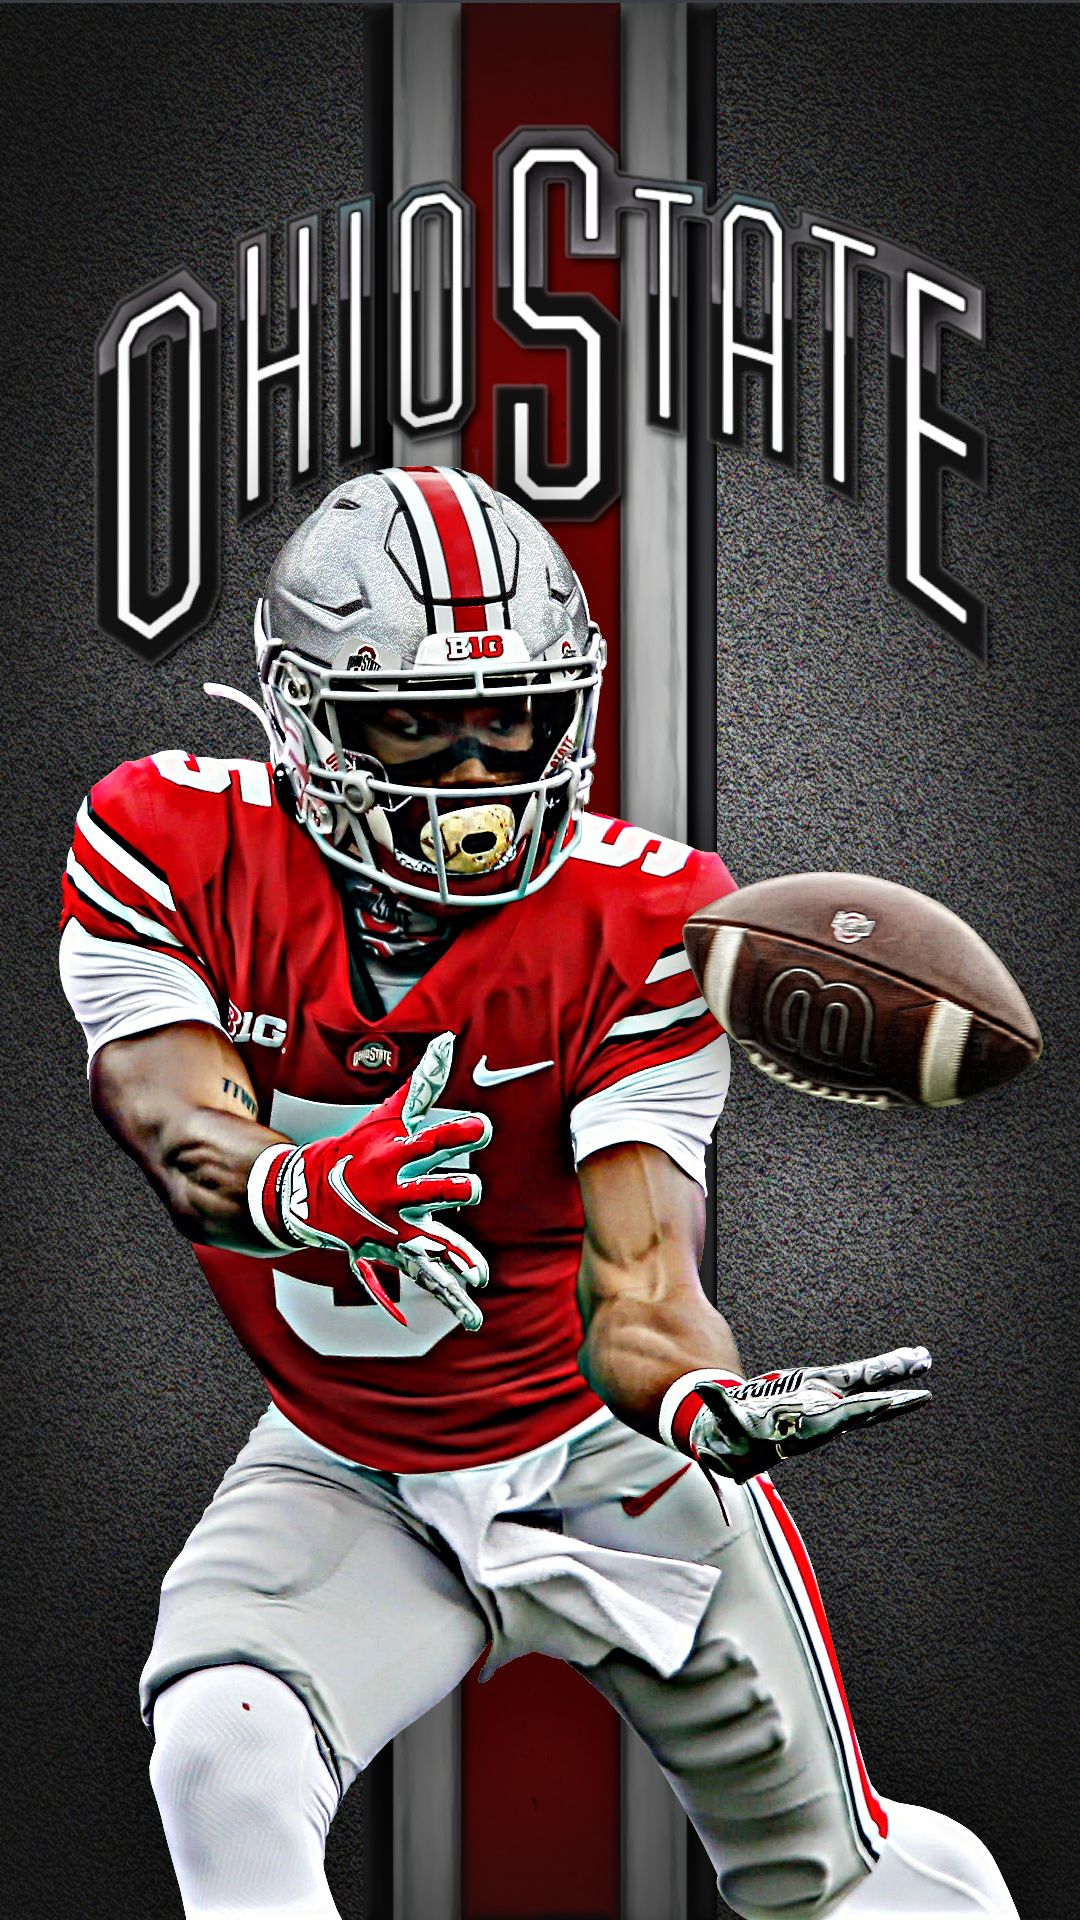 Buckeye Lock Screen 650 A 4 For IPhone 8 & Samsung Galaxy S10 Add It To You're